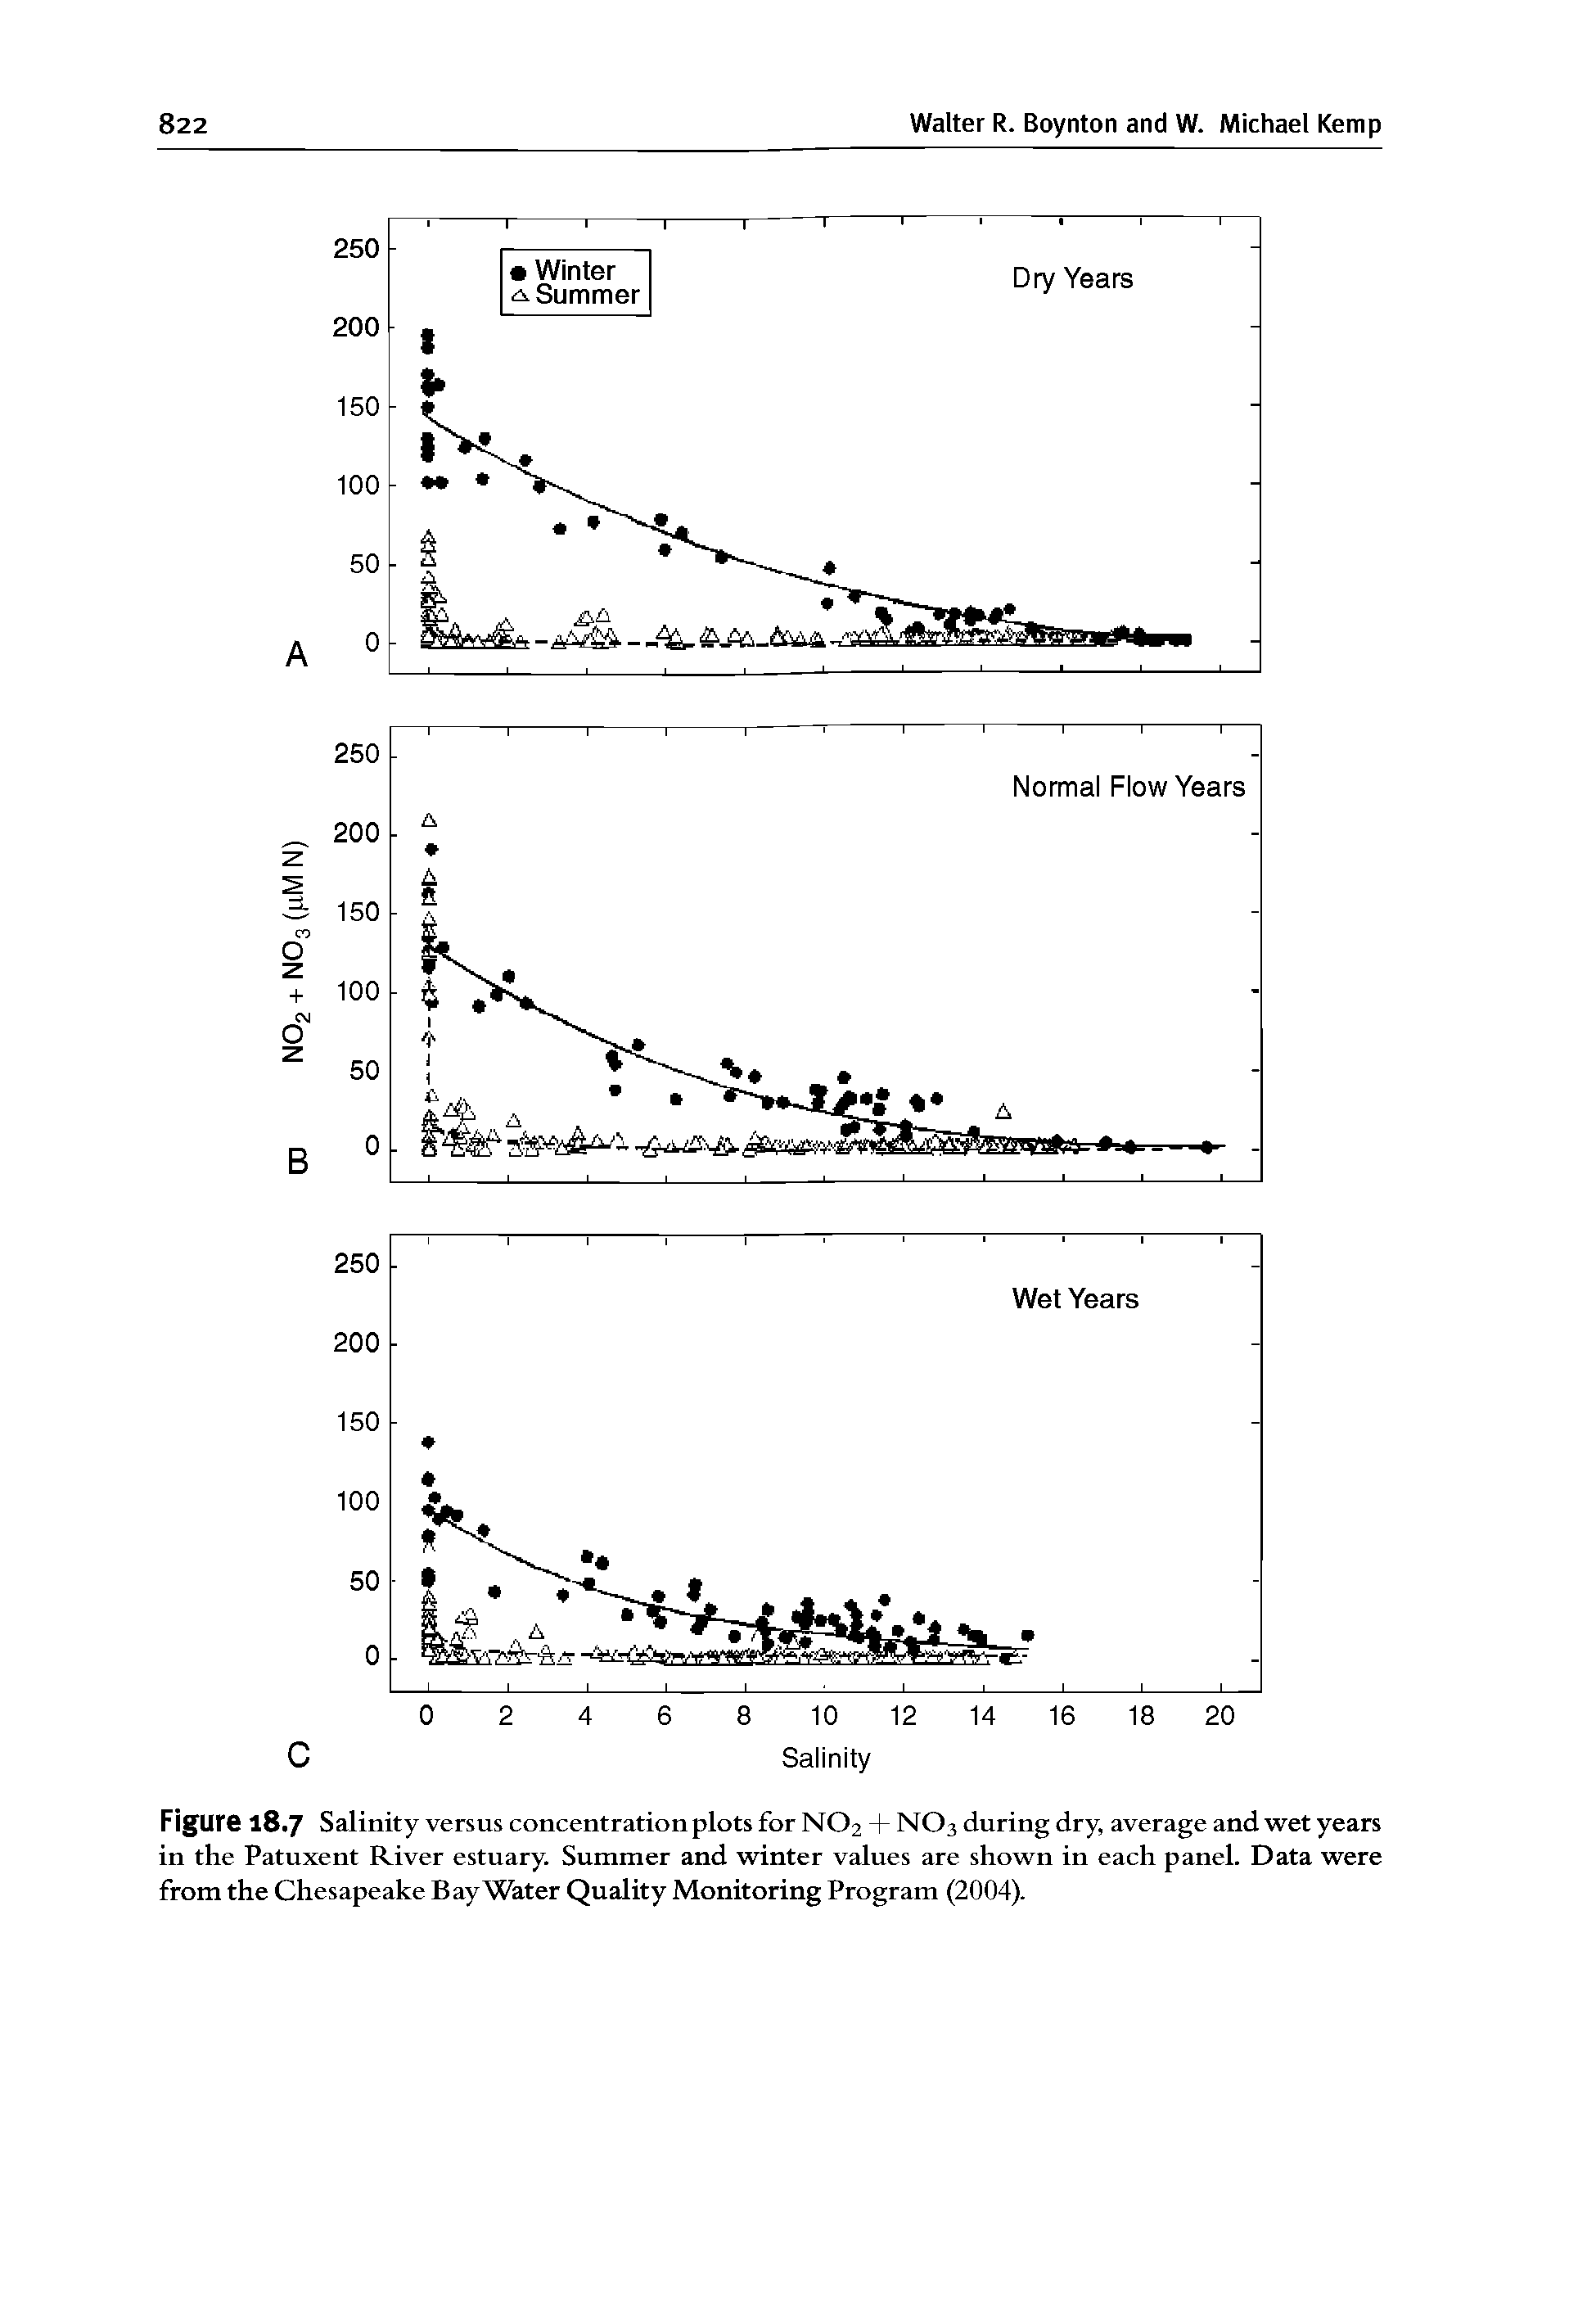 Figure 18.7 Salinity versus concentration plots for NO2 + NO3 during dry, average and wet years in the Patuxent River estuary. Summer and winter values are shown in each panel. Data were from the Chesapeake Bay Water Quality Monitoring Program (2004).